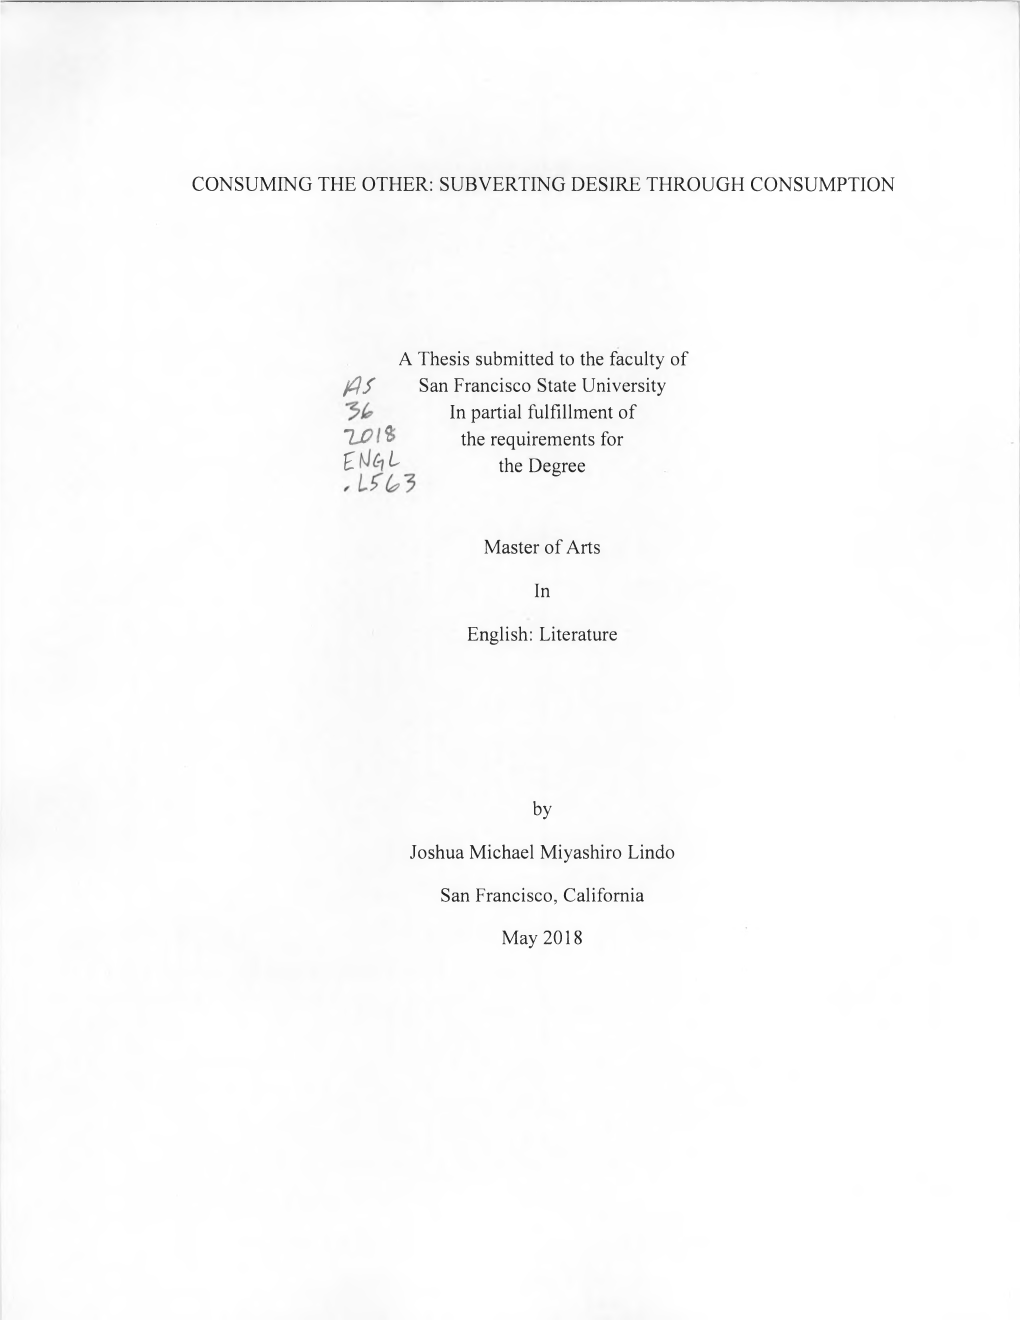 CONSUMING the OTHER: SUBVERTING DESIRE THROUGH CONSUMPTION a Thesis Submitted to the Faculty of Fis San Francisco State Universi